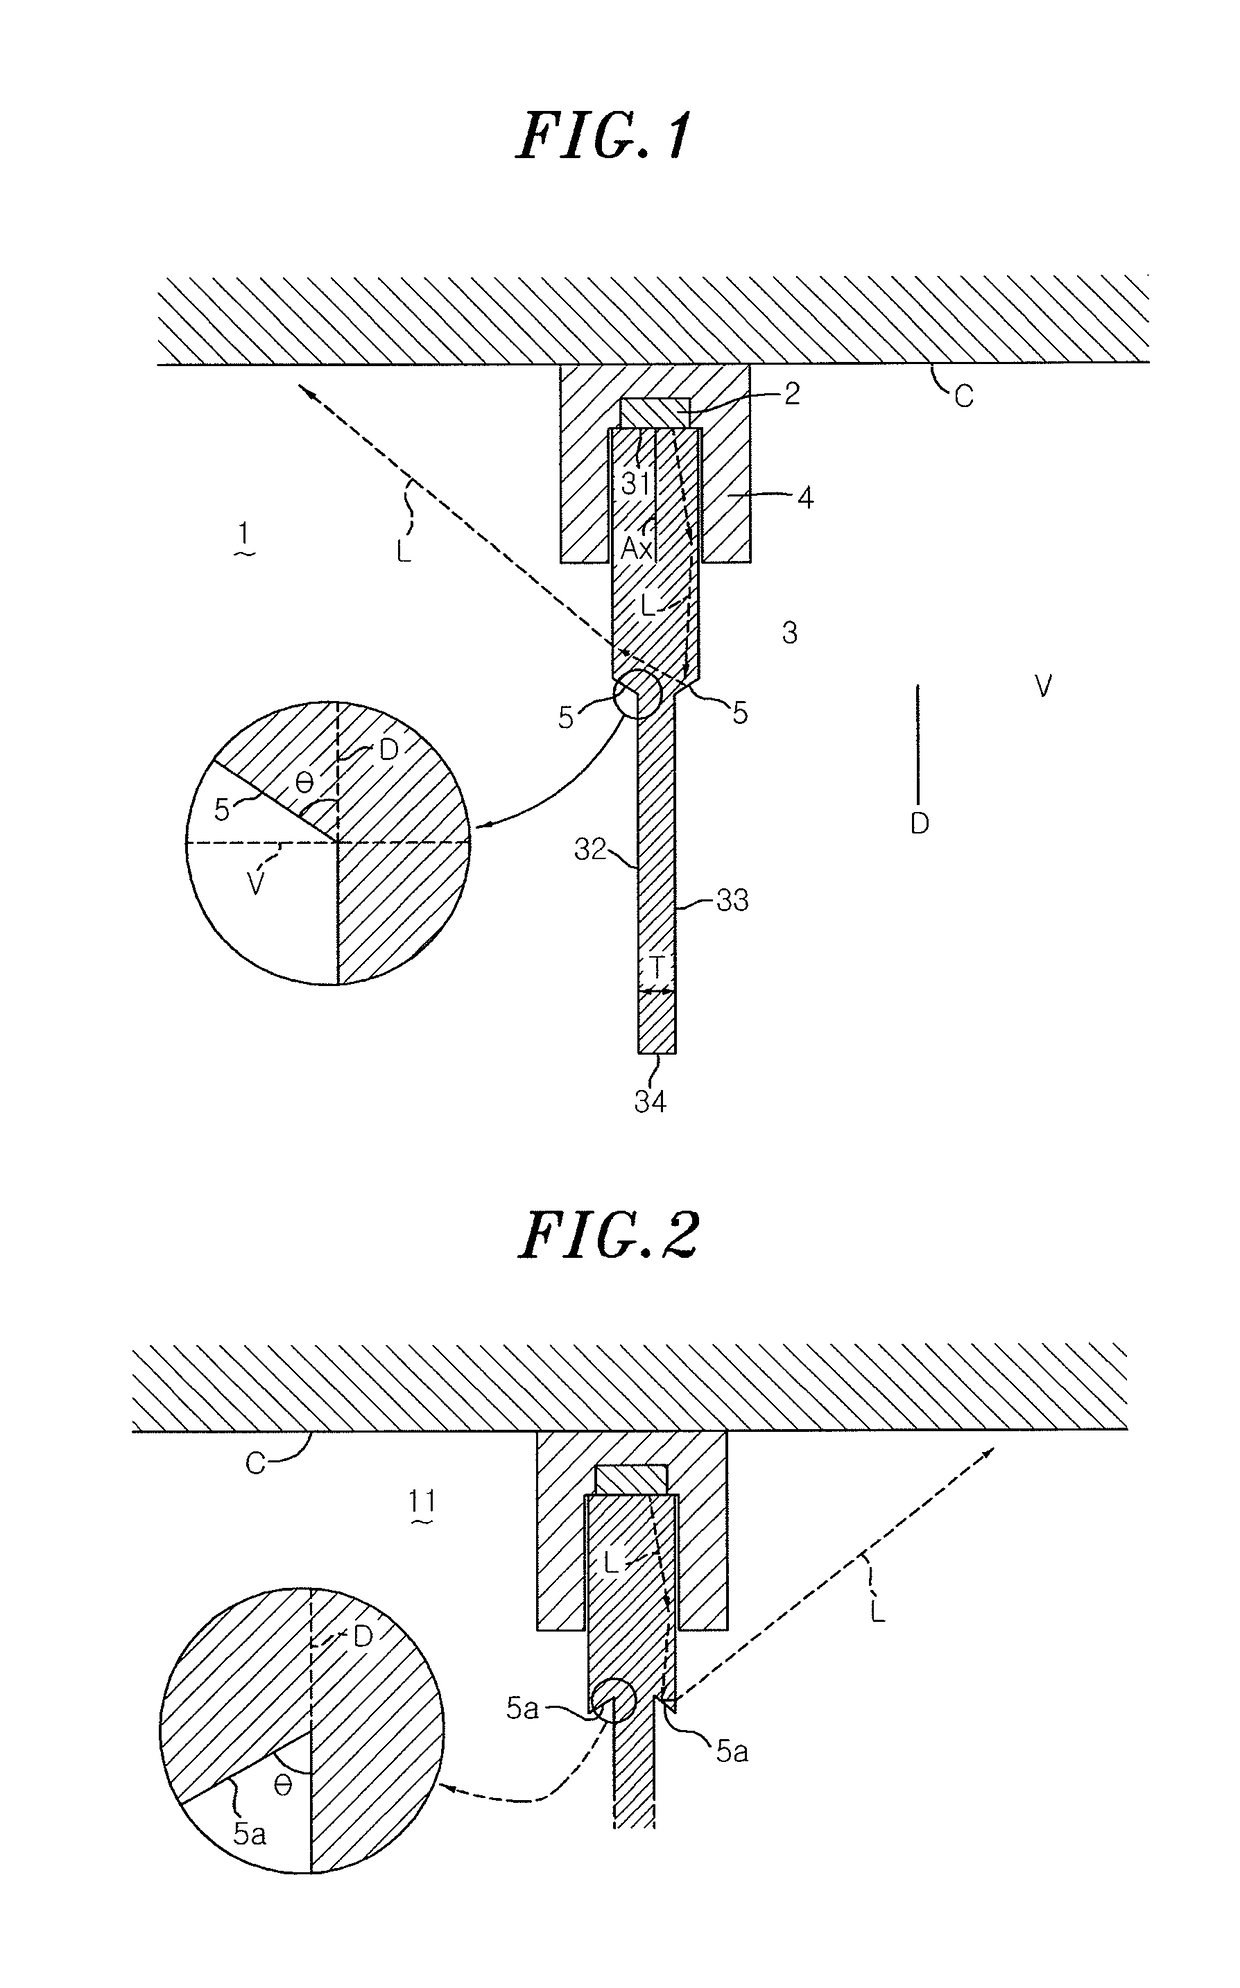 Illumination device with at least one main emission surface having a stepped surface configured to reflect light in multiple directions